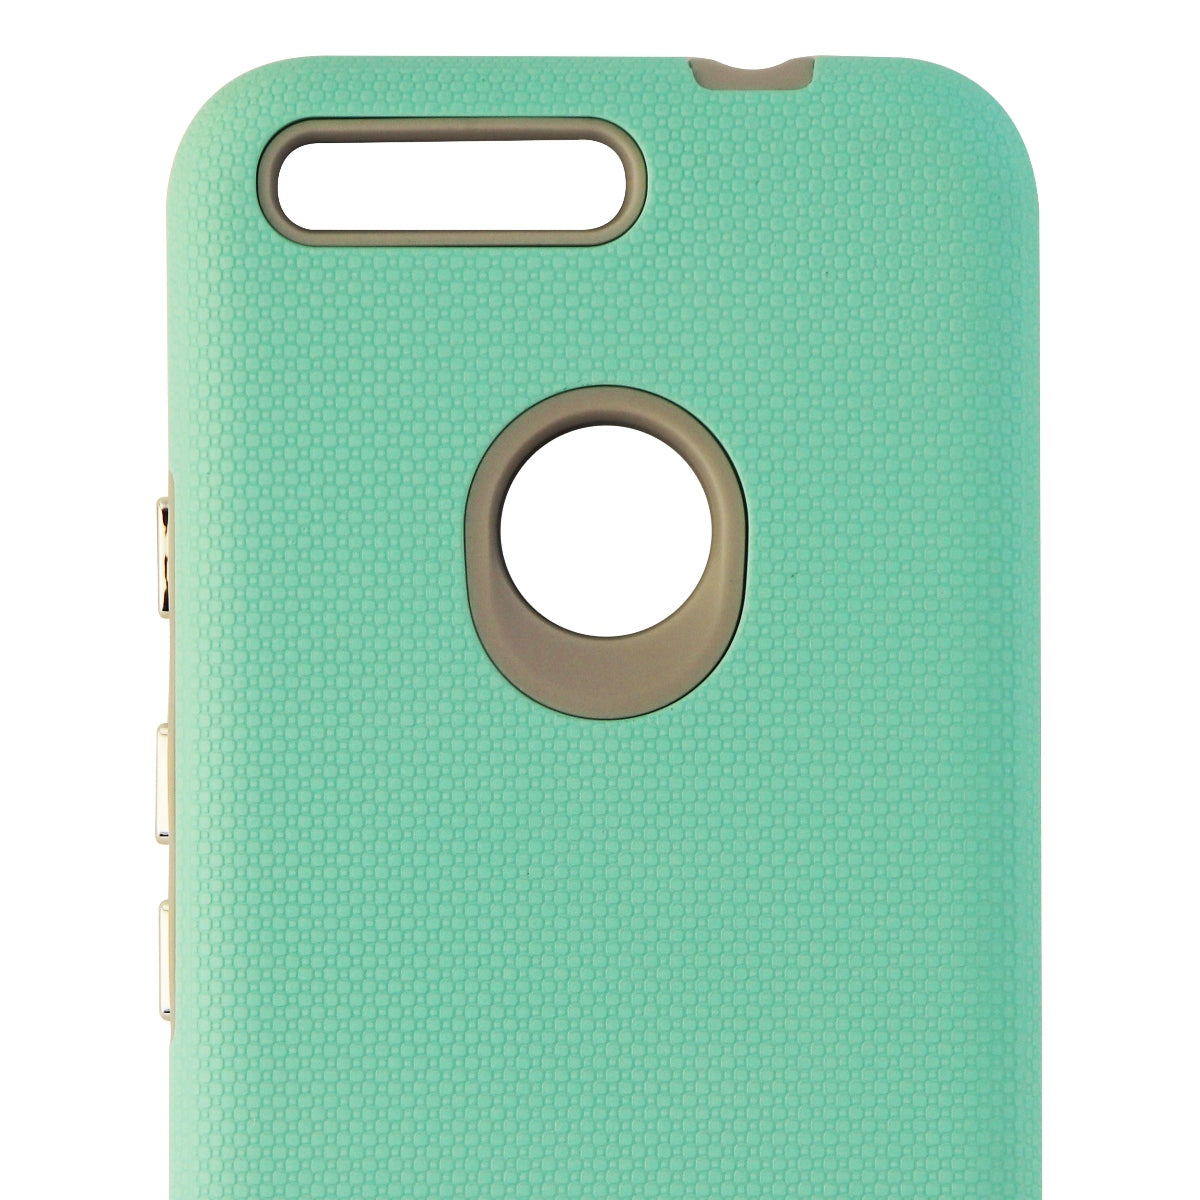 Nimbus9 Latitude Series Dual Layer Case Cover for Google Pixel - Teal/Gray Cell Phone - Cases, Covers & Skins Nimbus9    - Simple Cell Bulk Wholesale Pricing - USA Seller